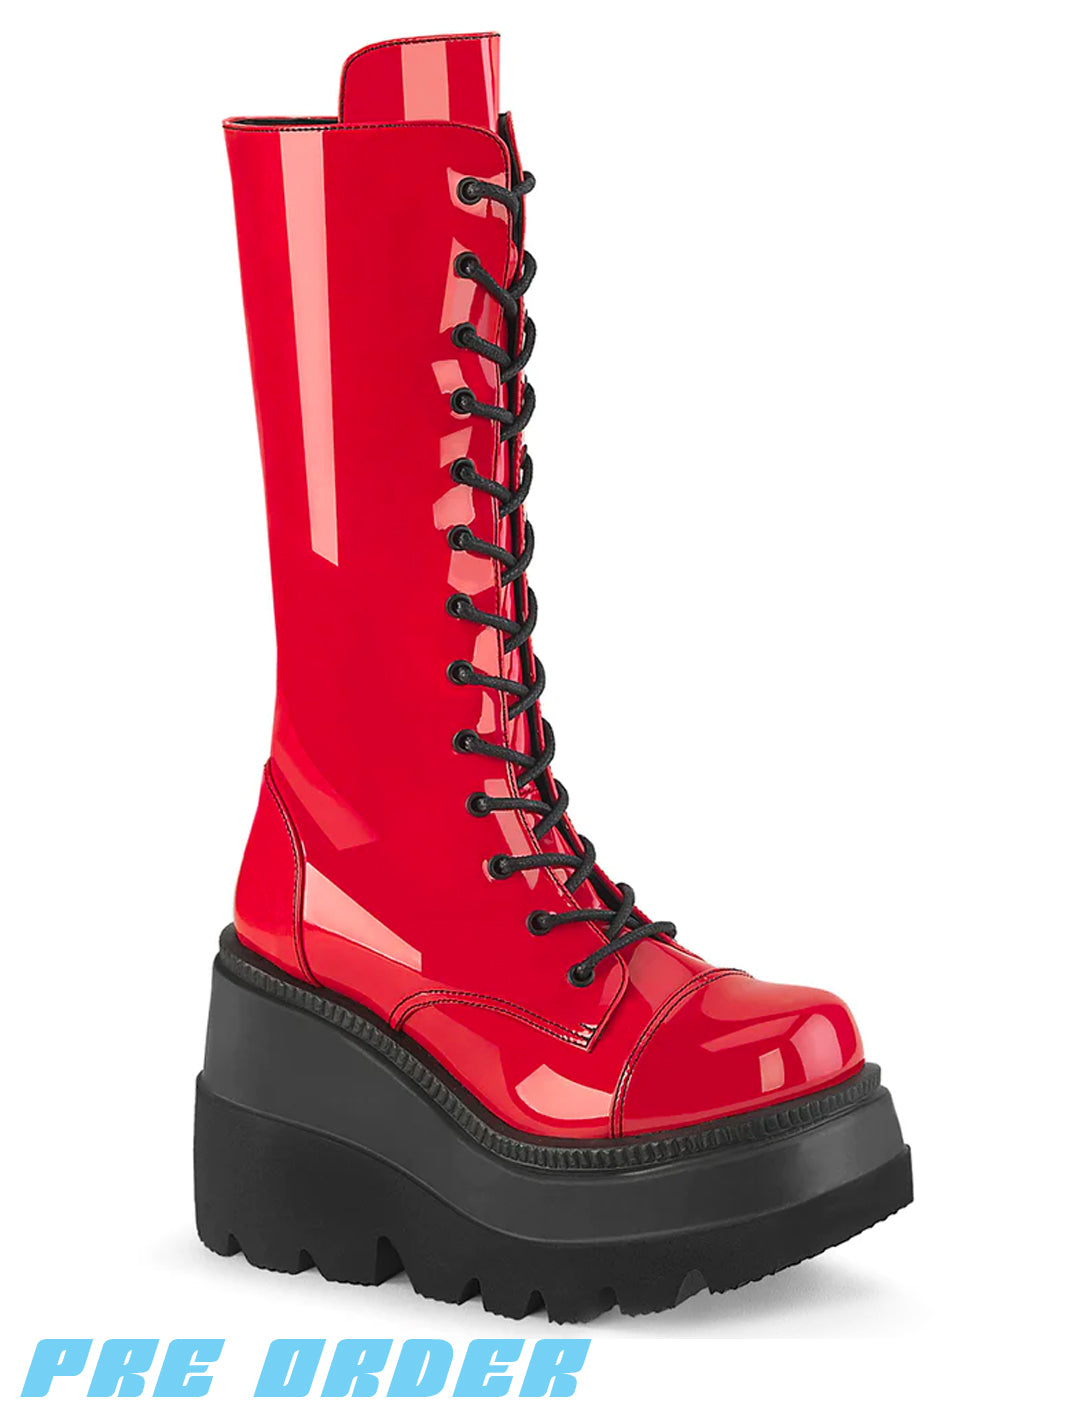 DEMONIA SHAKER-72 BOOTS - RED PATENT ✰ PRE ORDER ✰